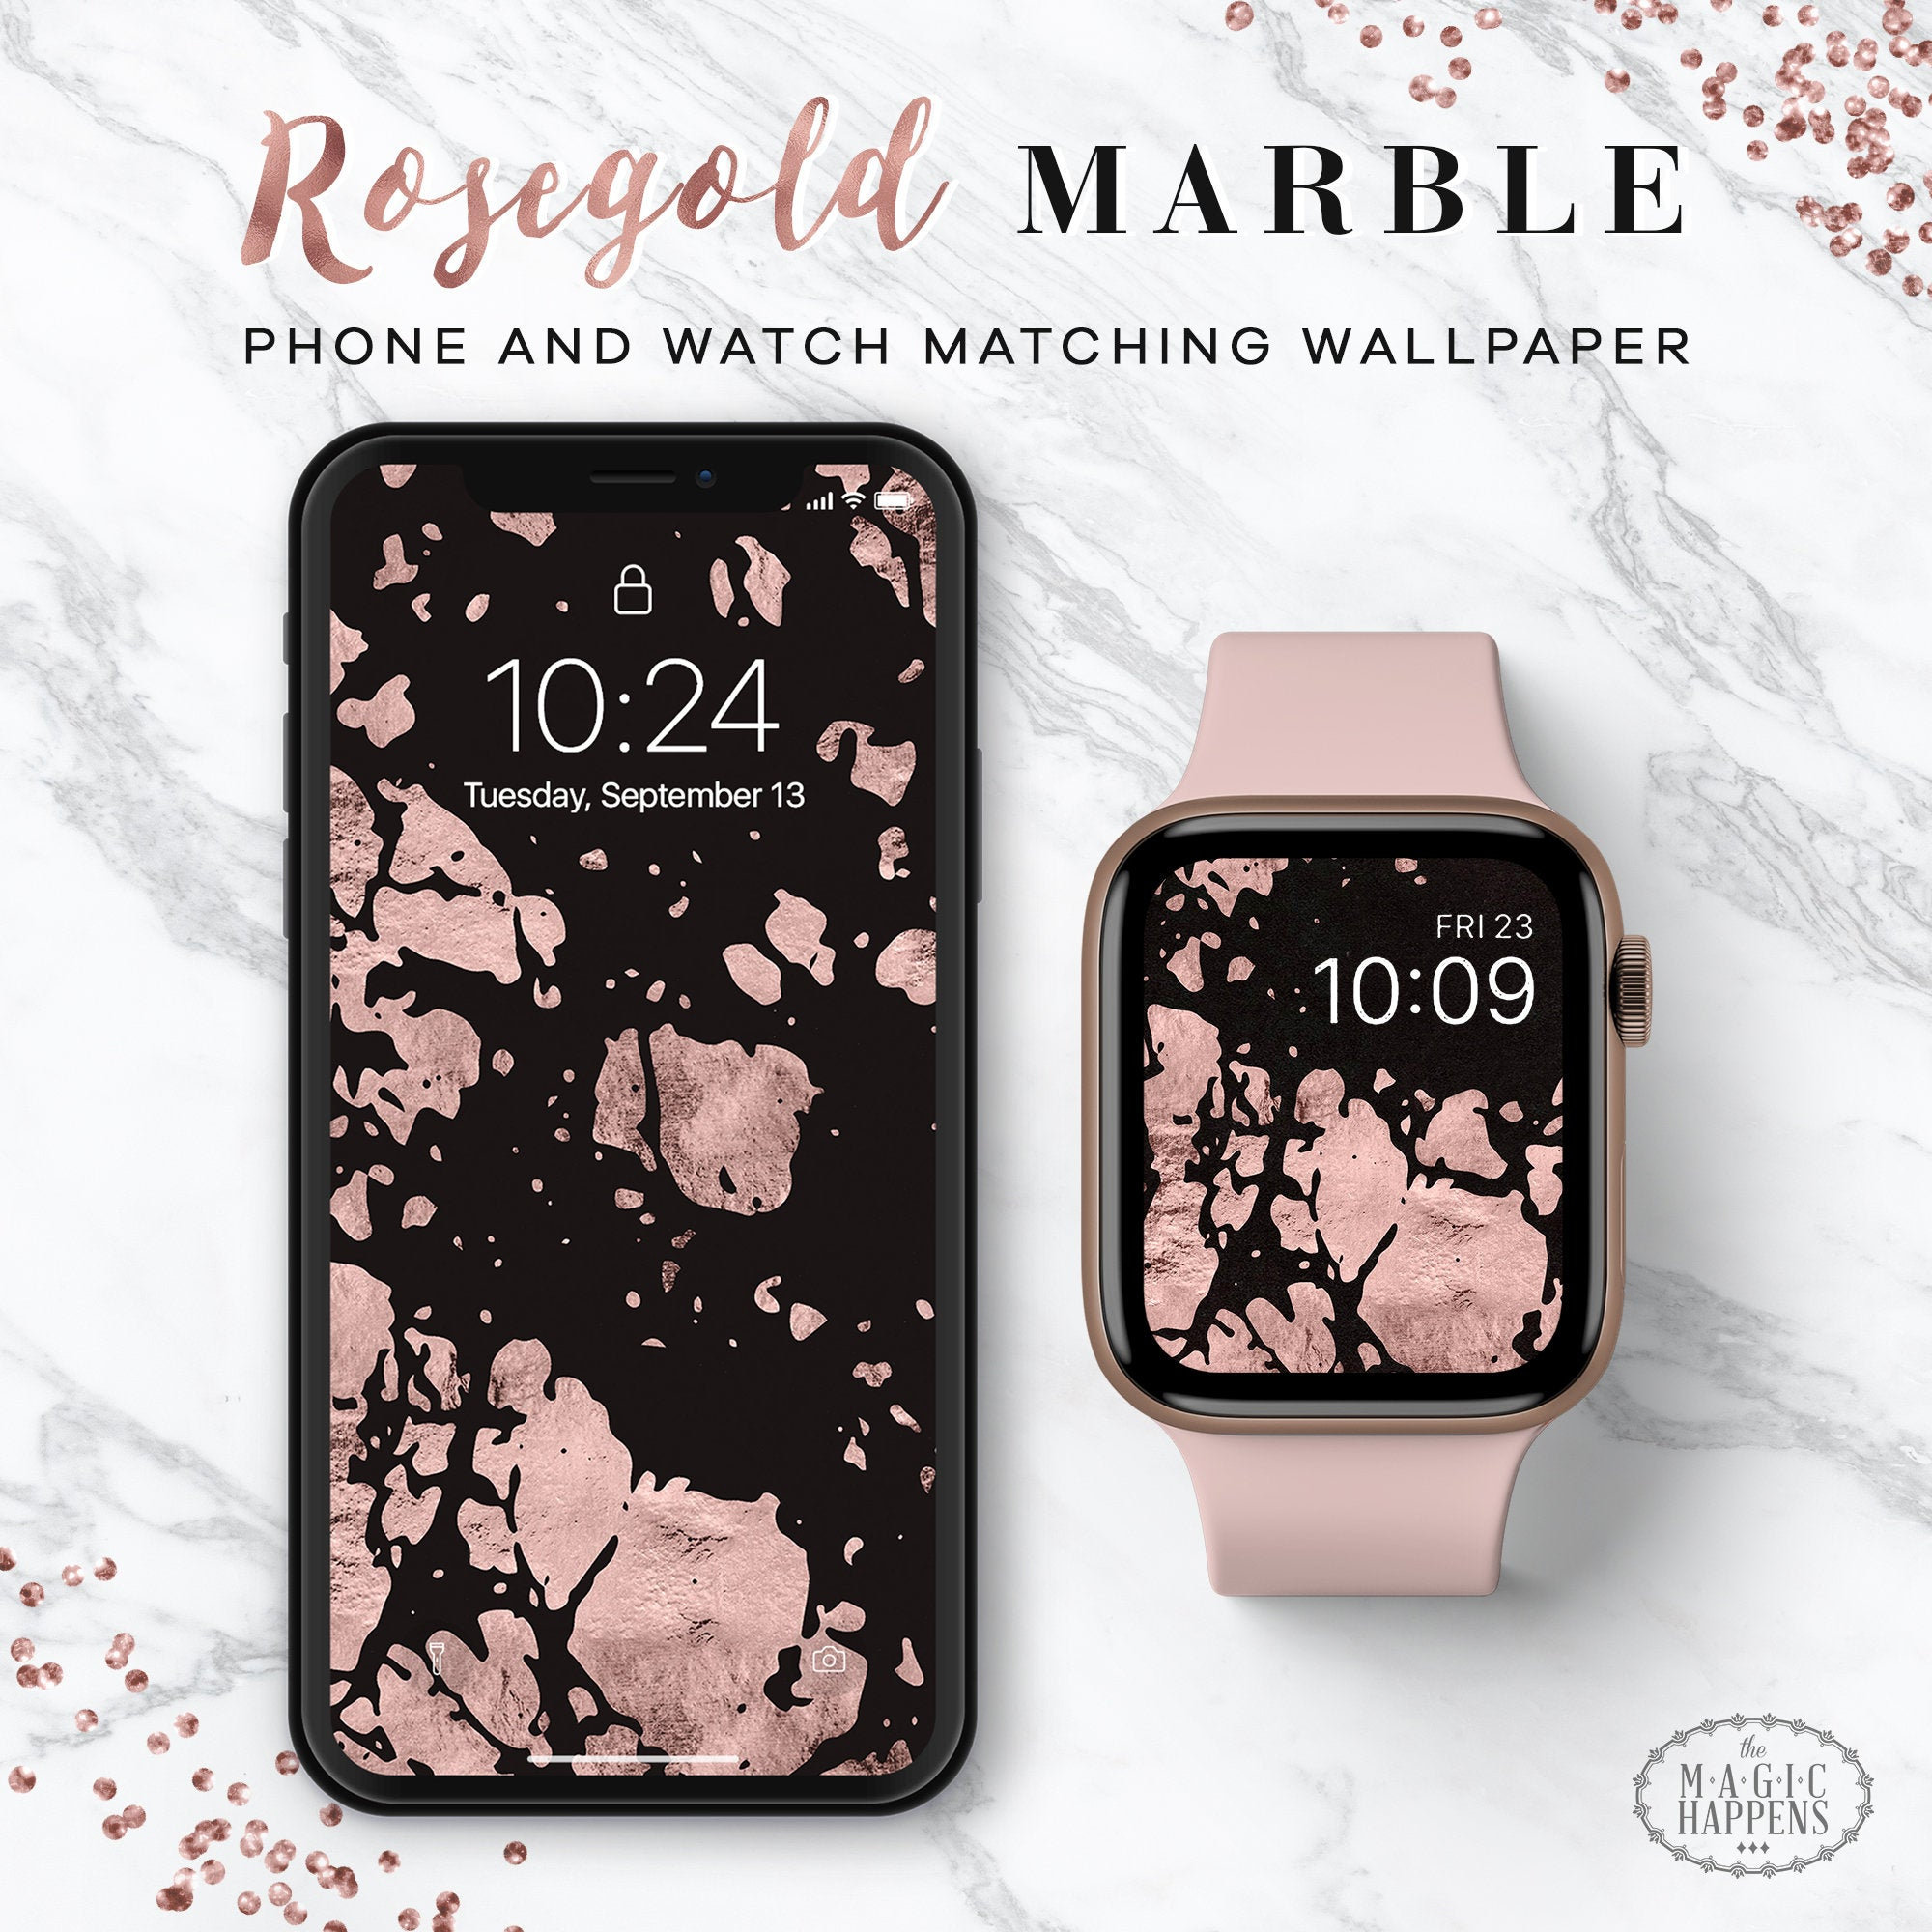 Apple Watch Wallpaper In Rosegold Marble Iphone Wallpaper Etsy